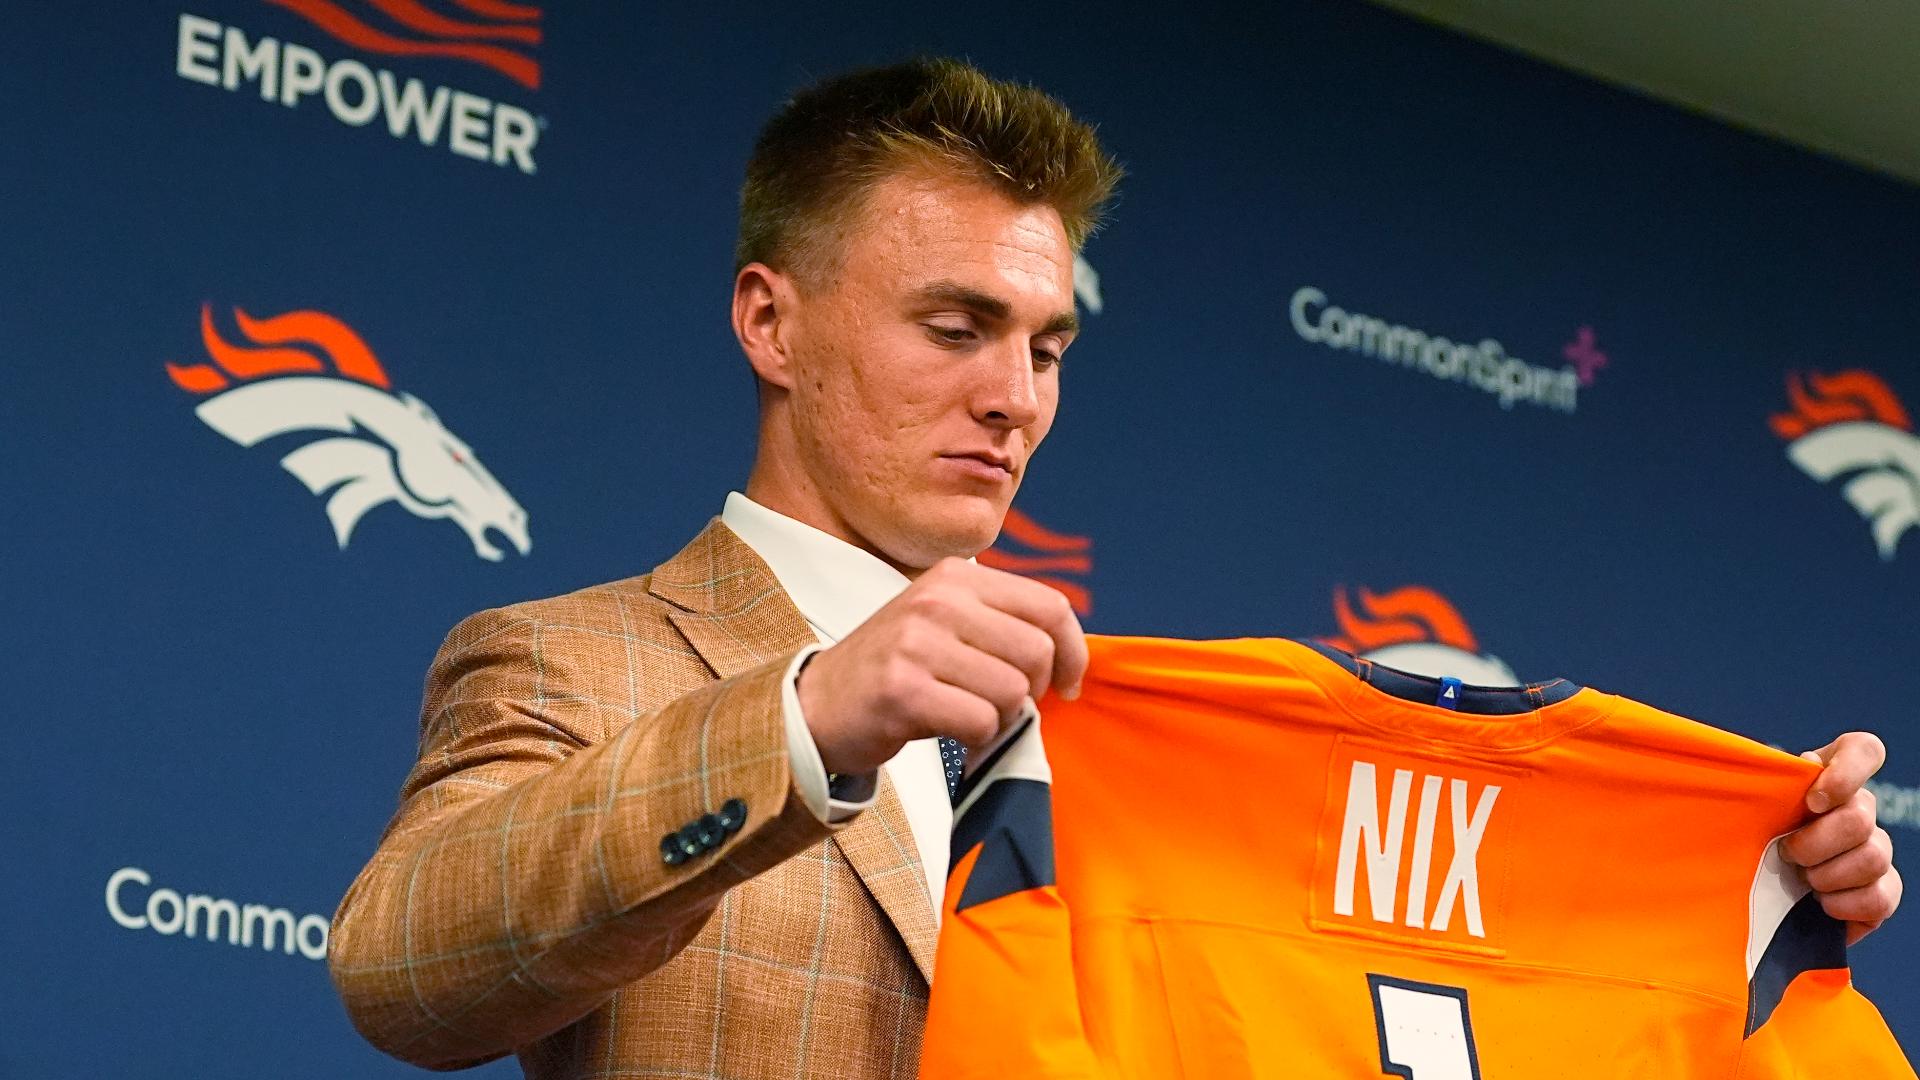 How much could the Broncos draft picks get?